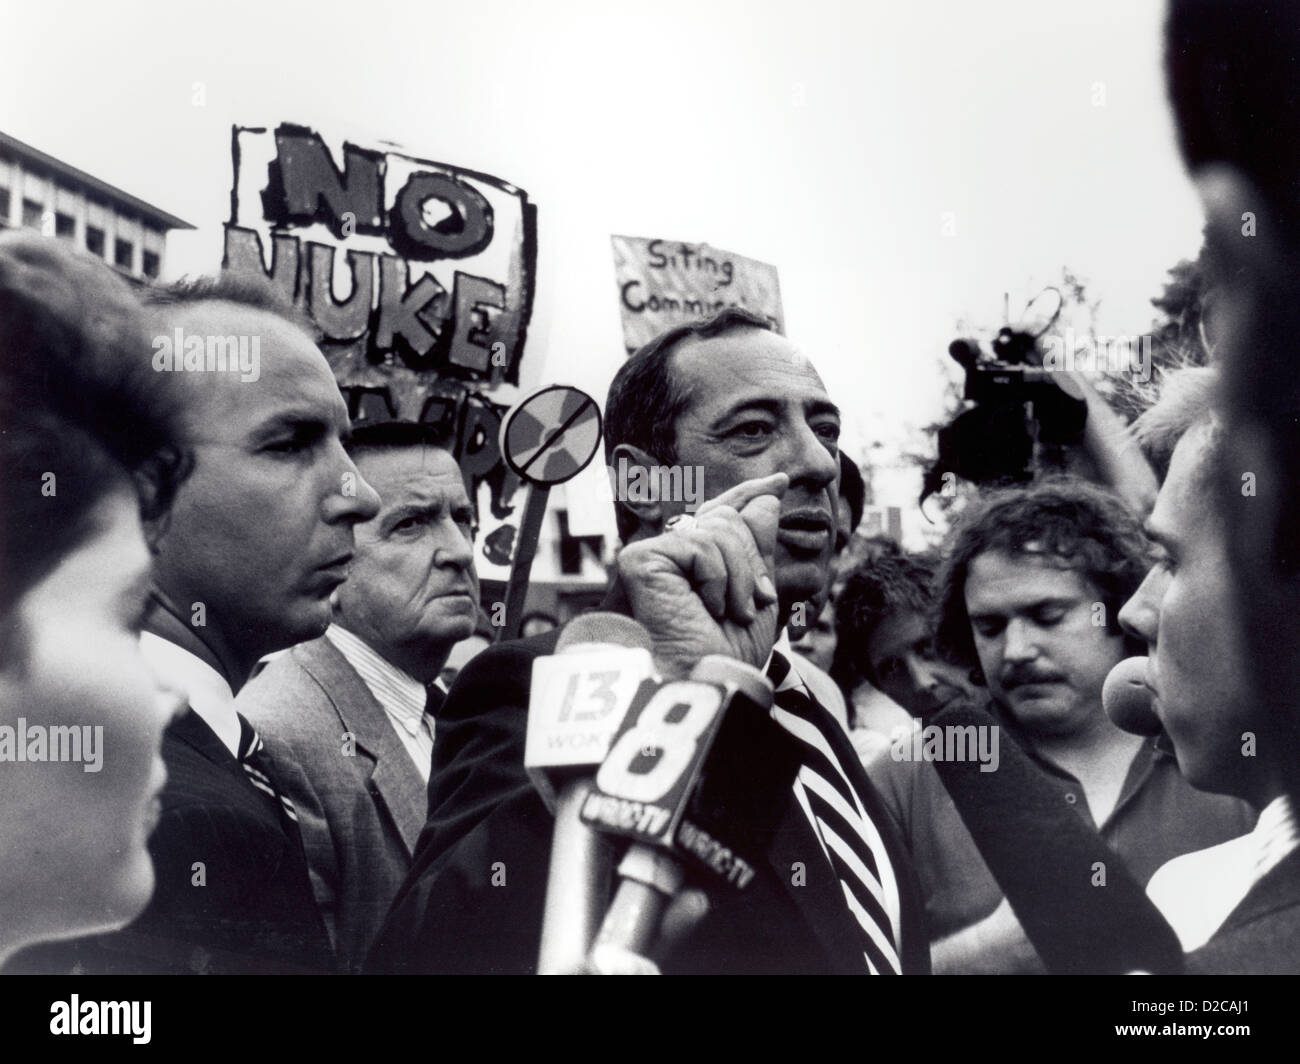 New York State, Alfred. New York State Governer Mario Cuomo Speaking At Anti-Nuclear Dump Protest Stock Photo